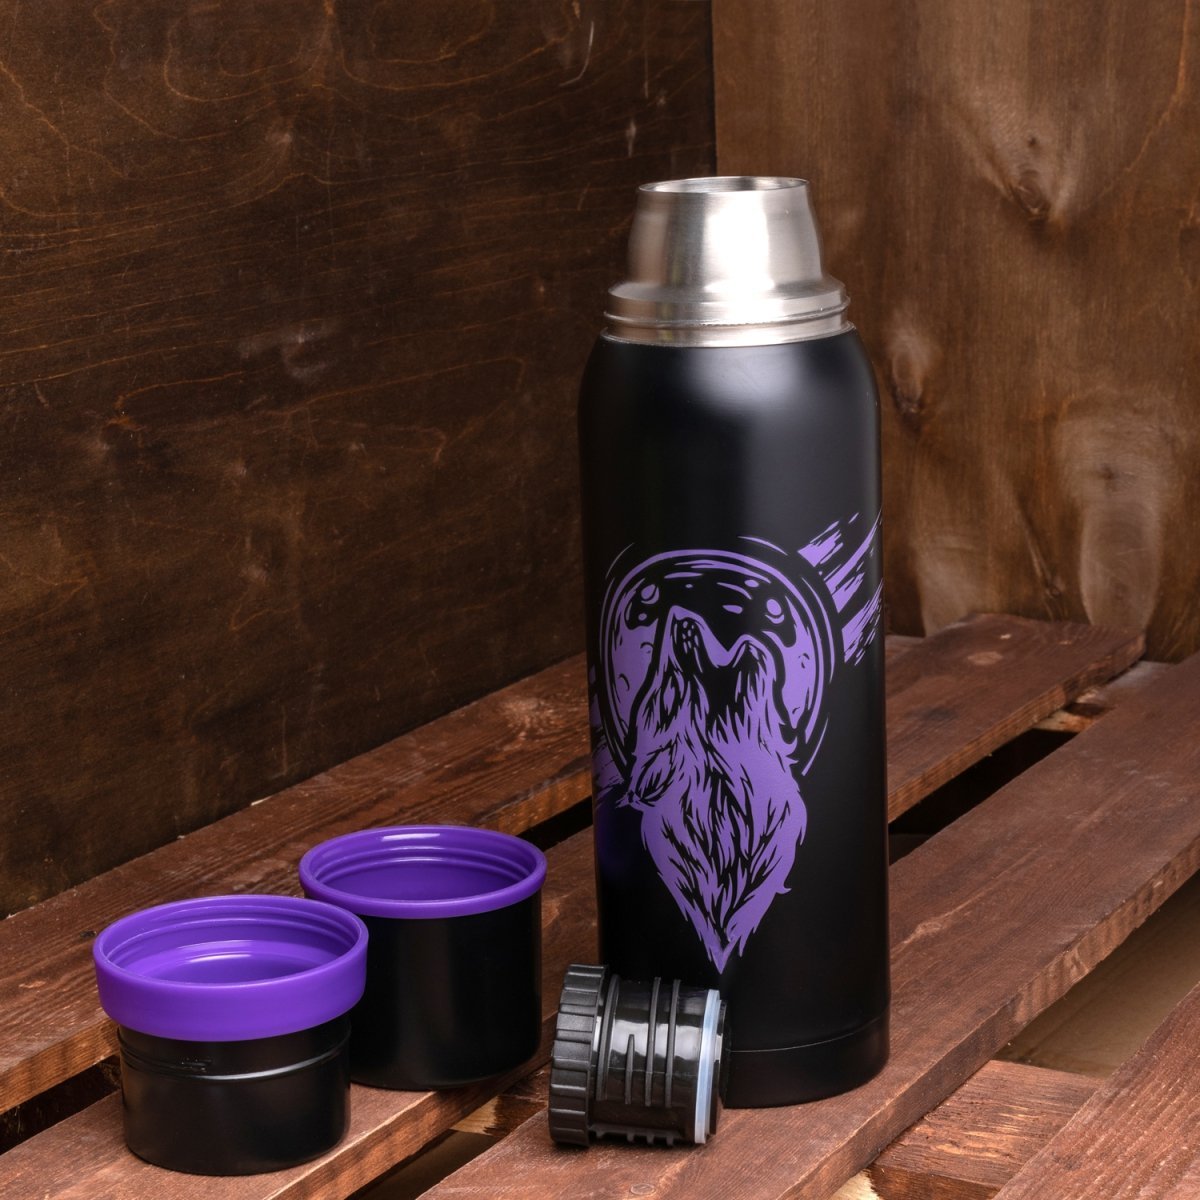 Big Stainless Steel Water Flask, Wolf Print, 40 oz standing on a wooden bench